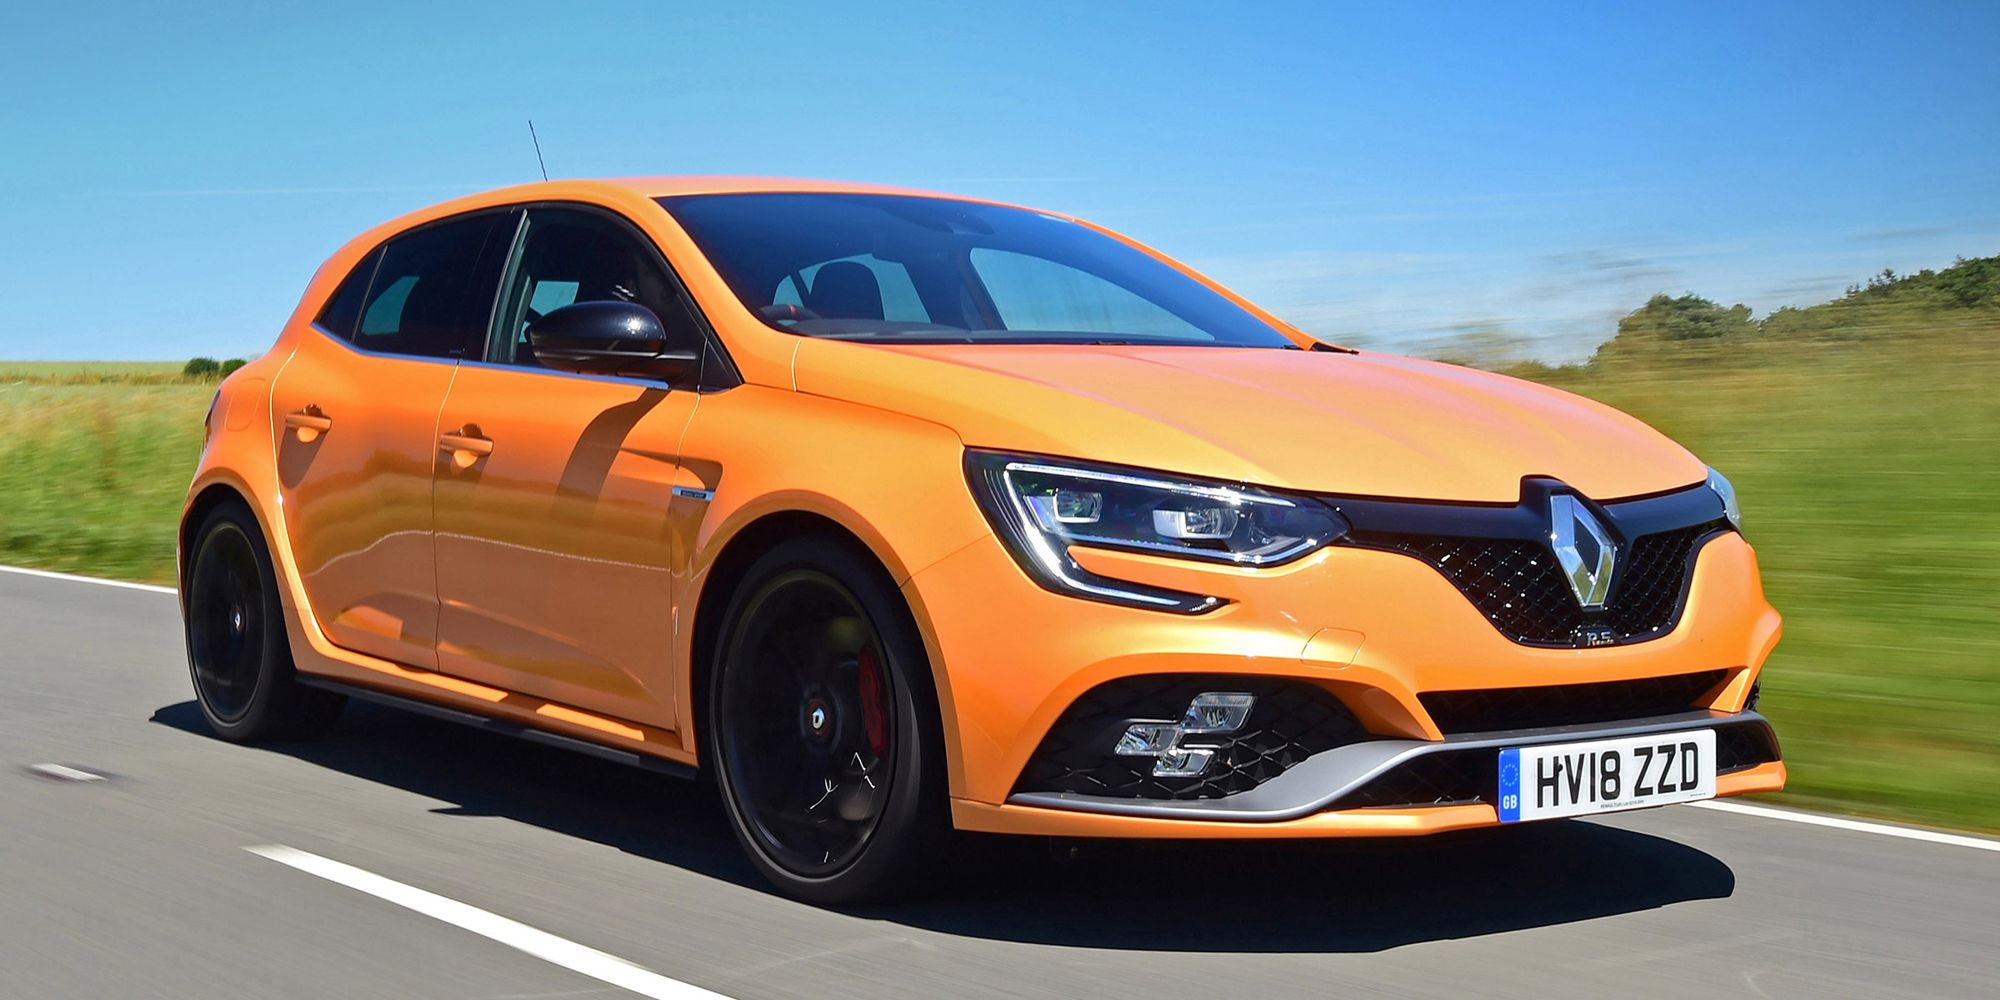 The new Megane RS on the move